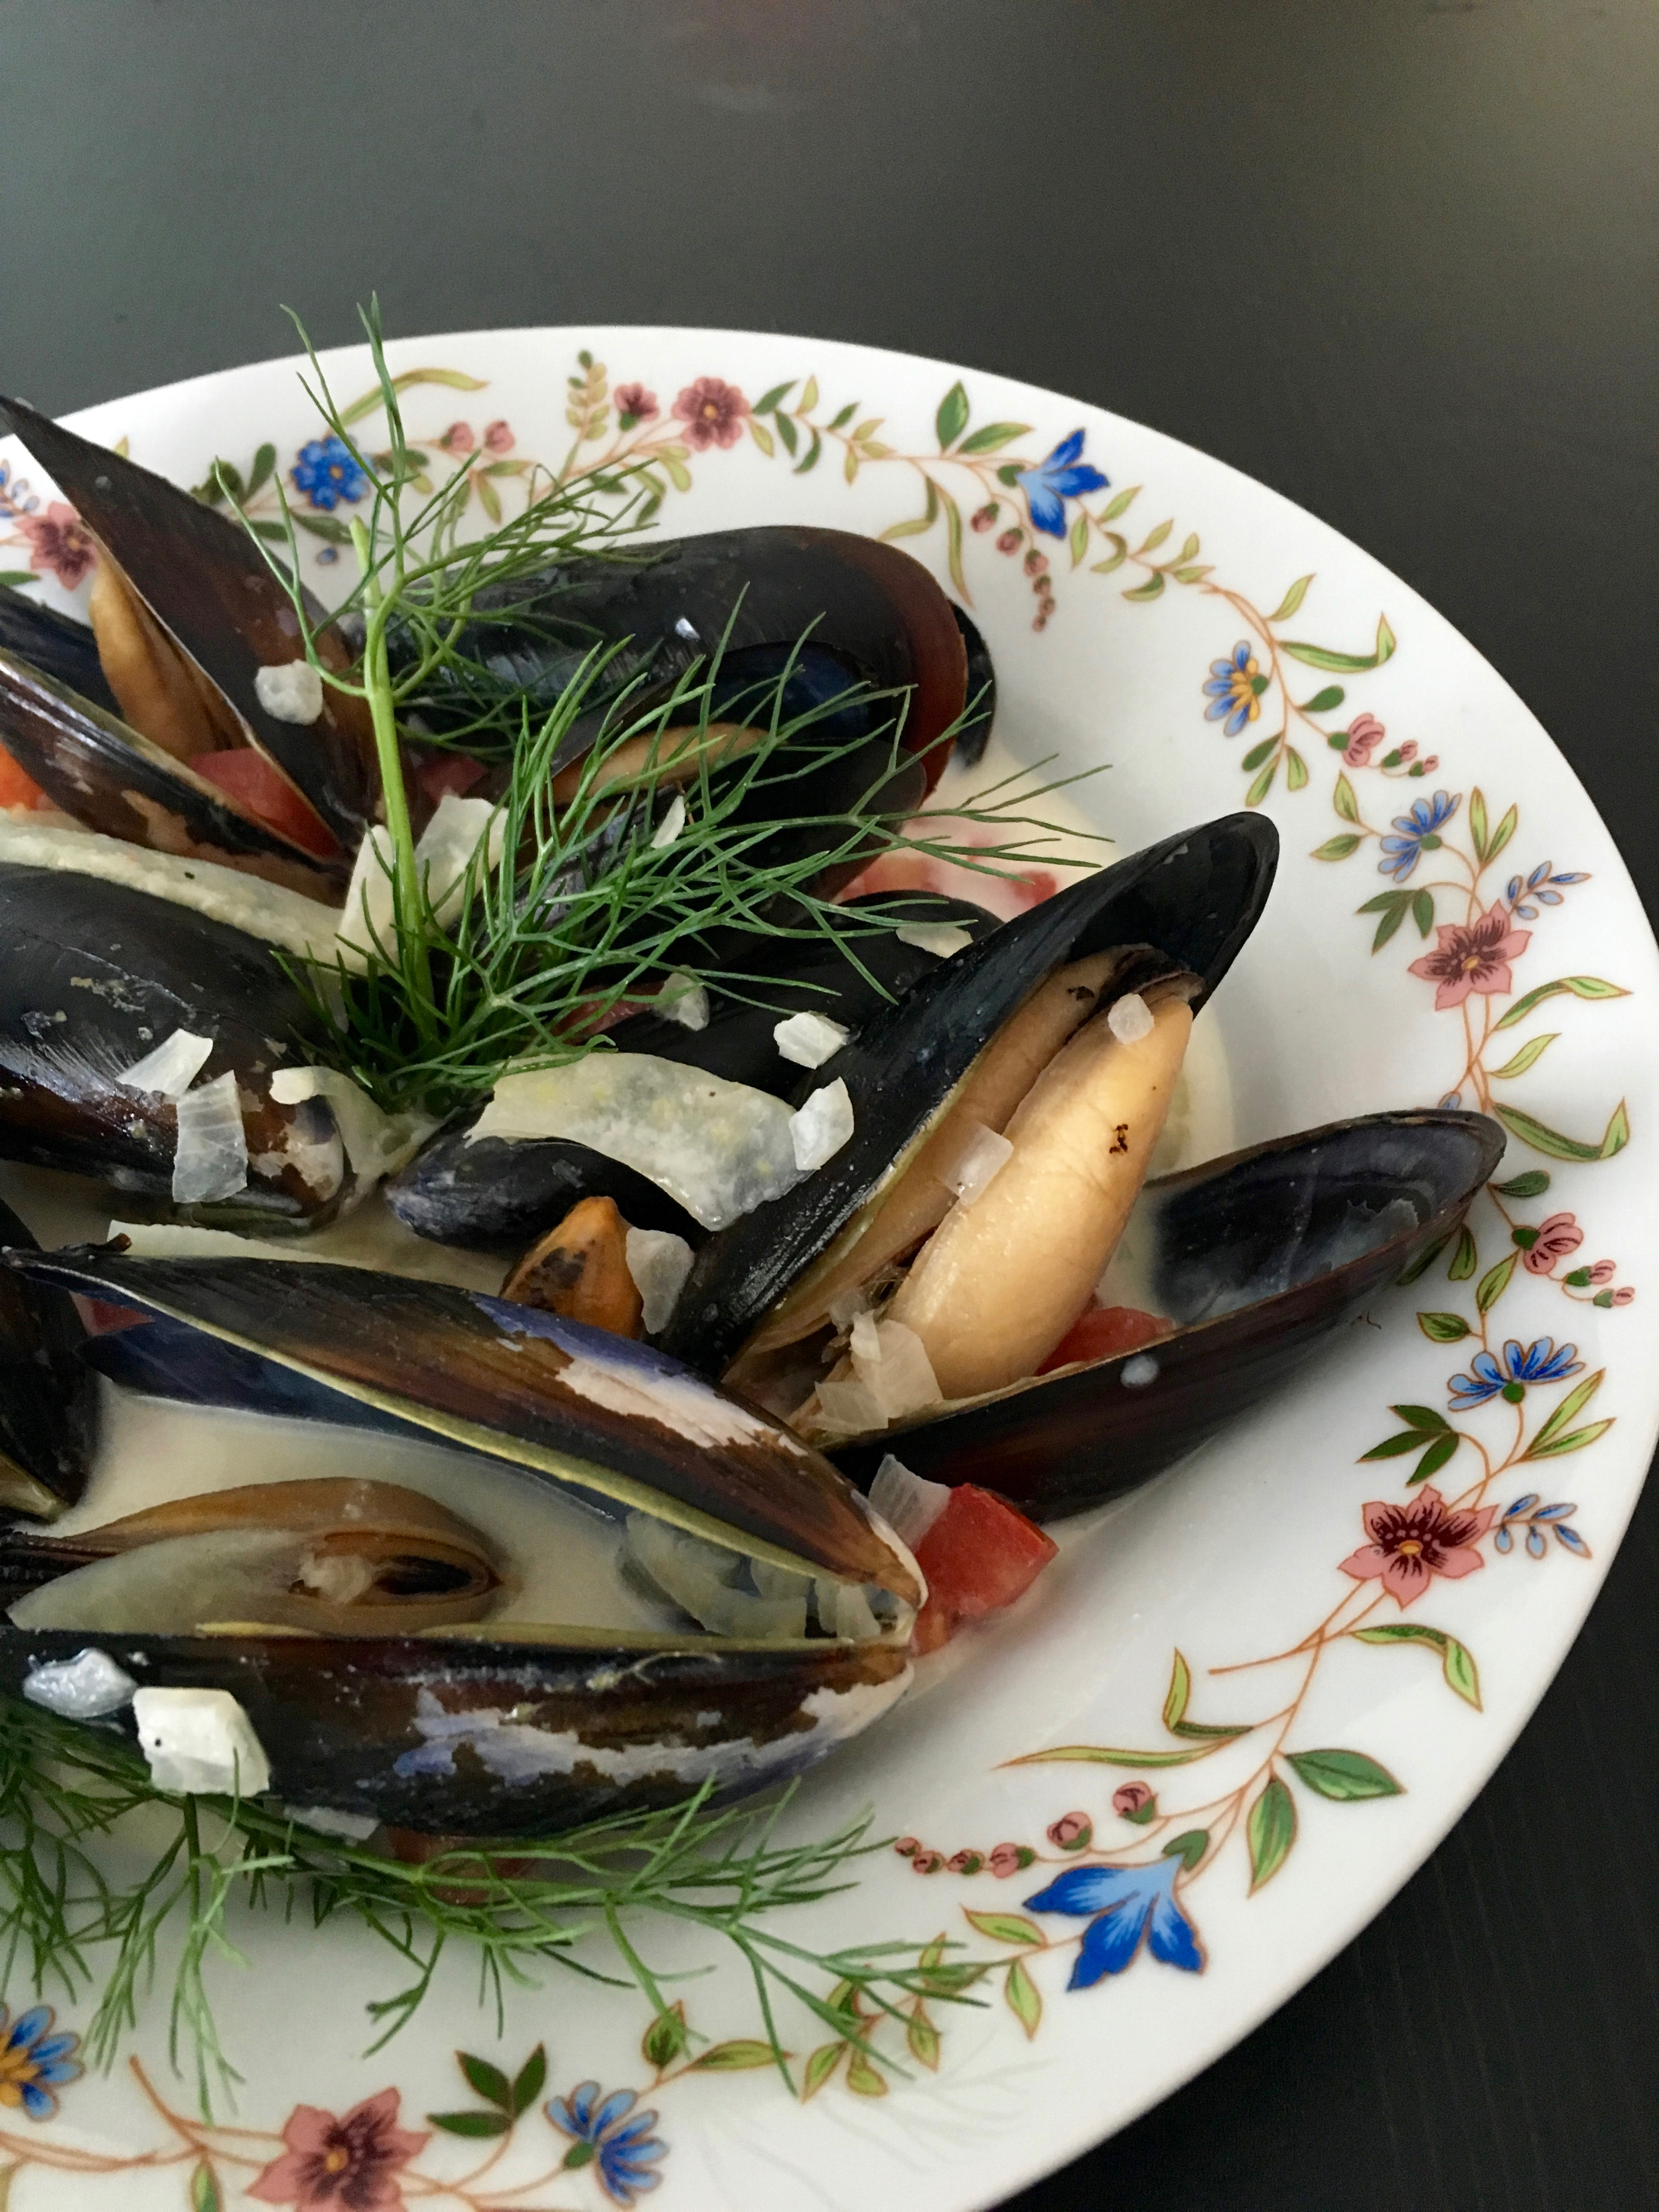 Roasted Mussels with Fennel